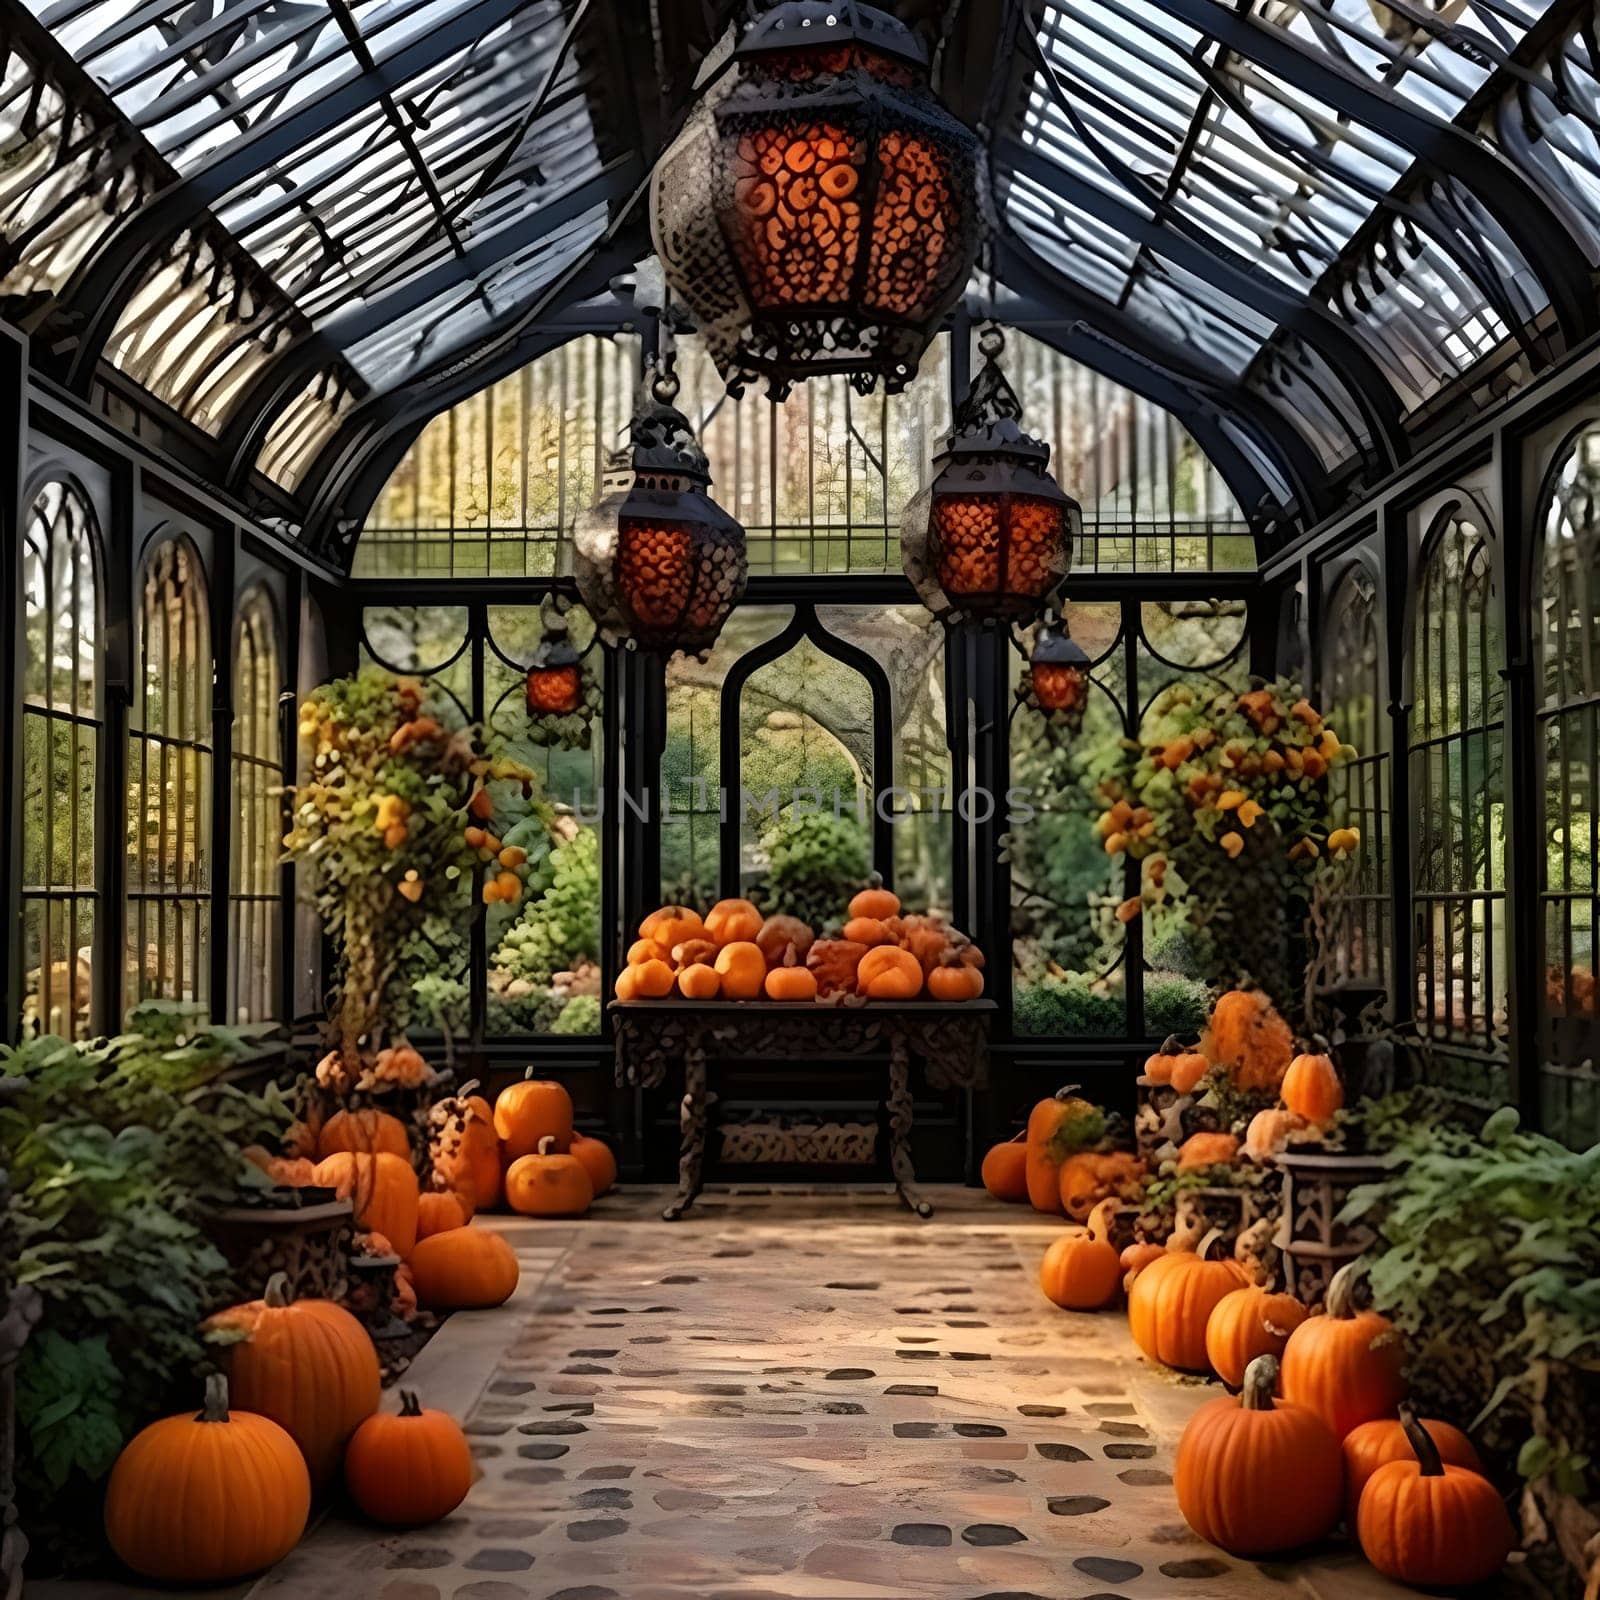 An elegant greenhouse filled with pumpkins. Pumpkin as a dish of thanksgiving for the harvest. The atmosphere of joy and celebration.